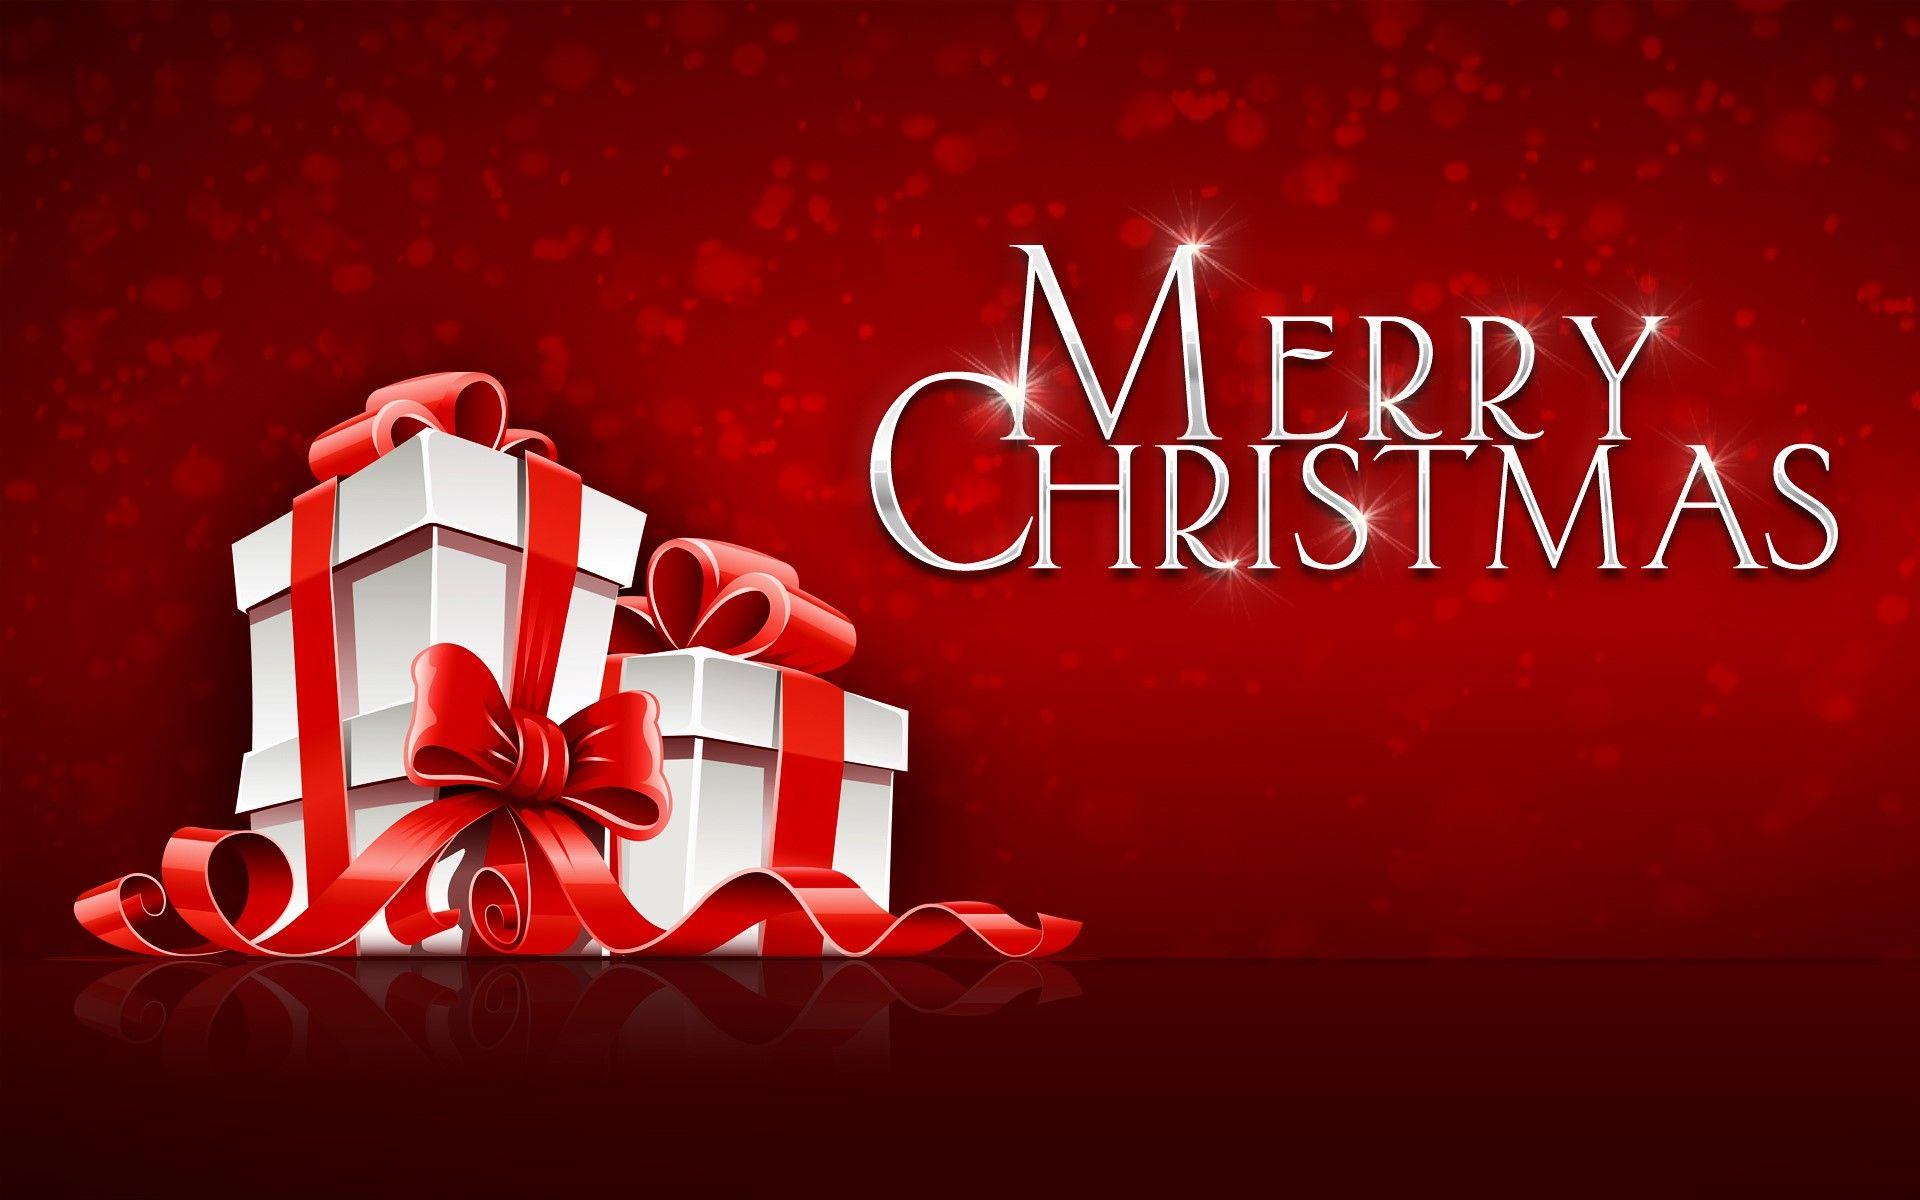 Merry Christmas Gift on Festival Red Background HD Wallpaper. HD